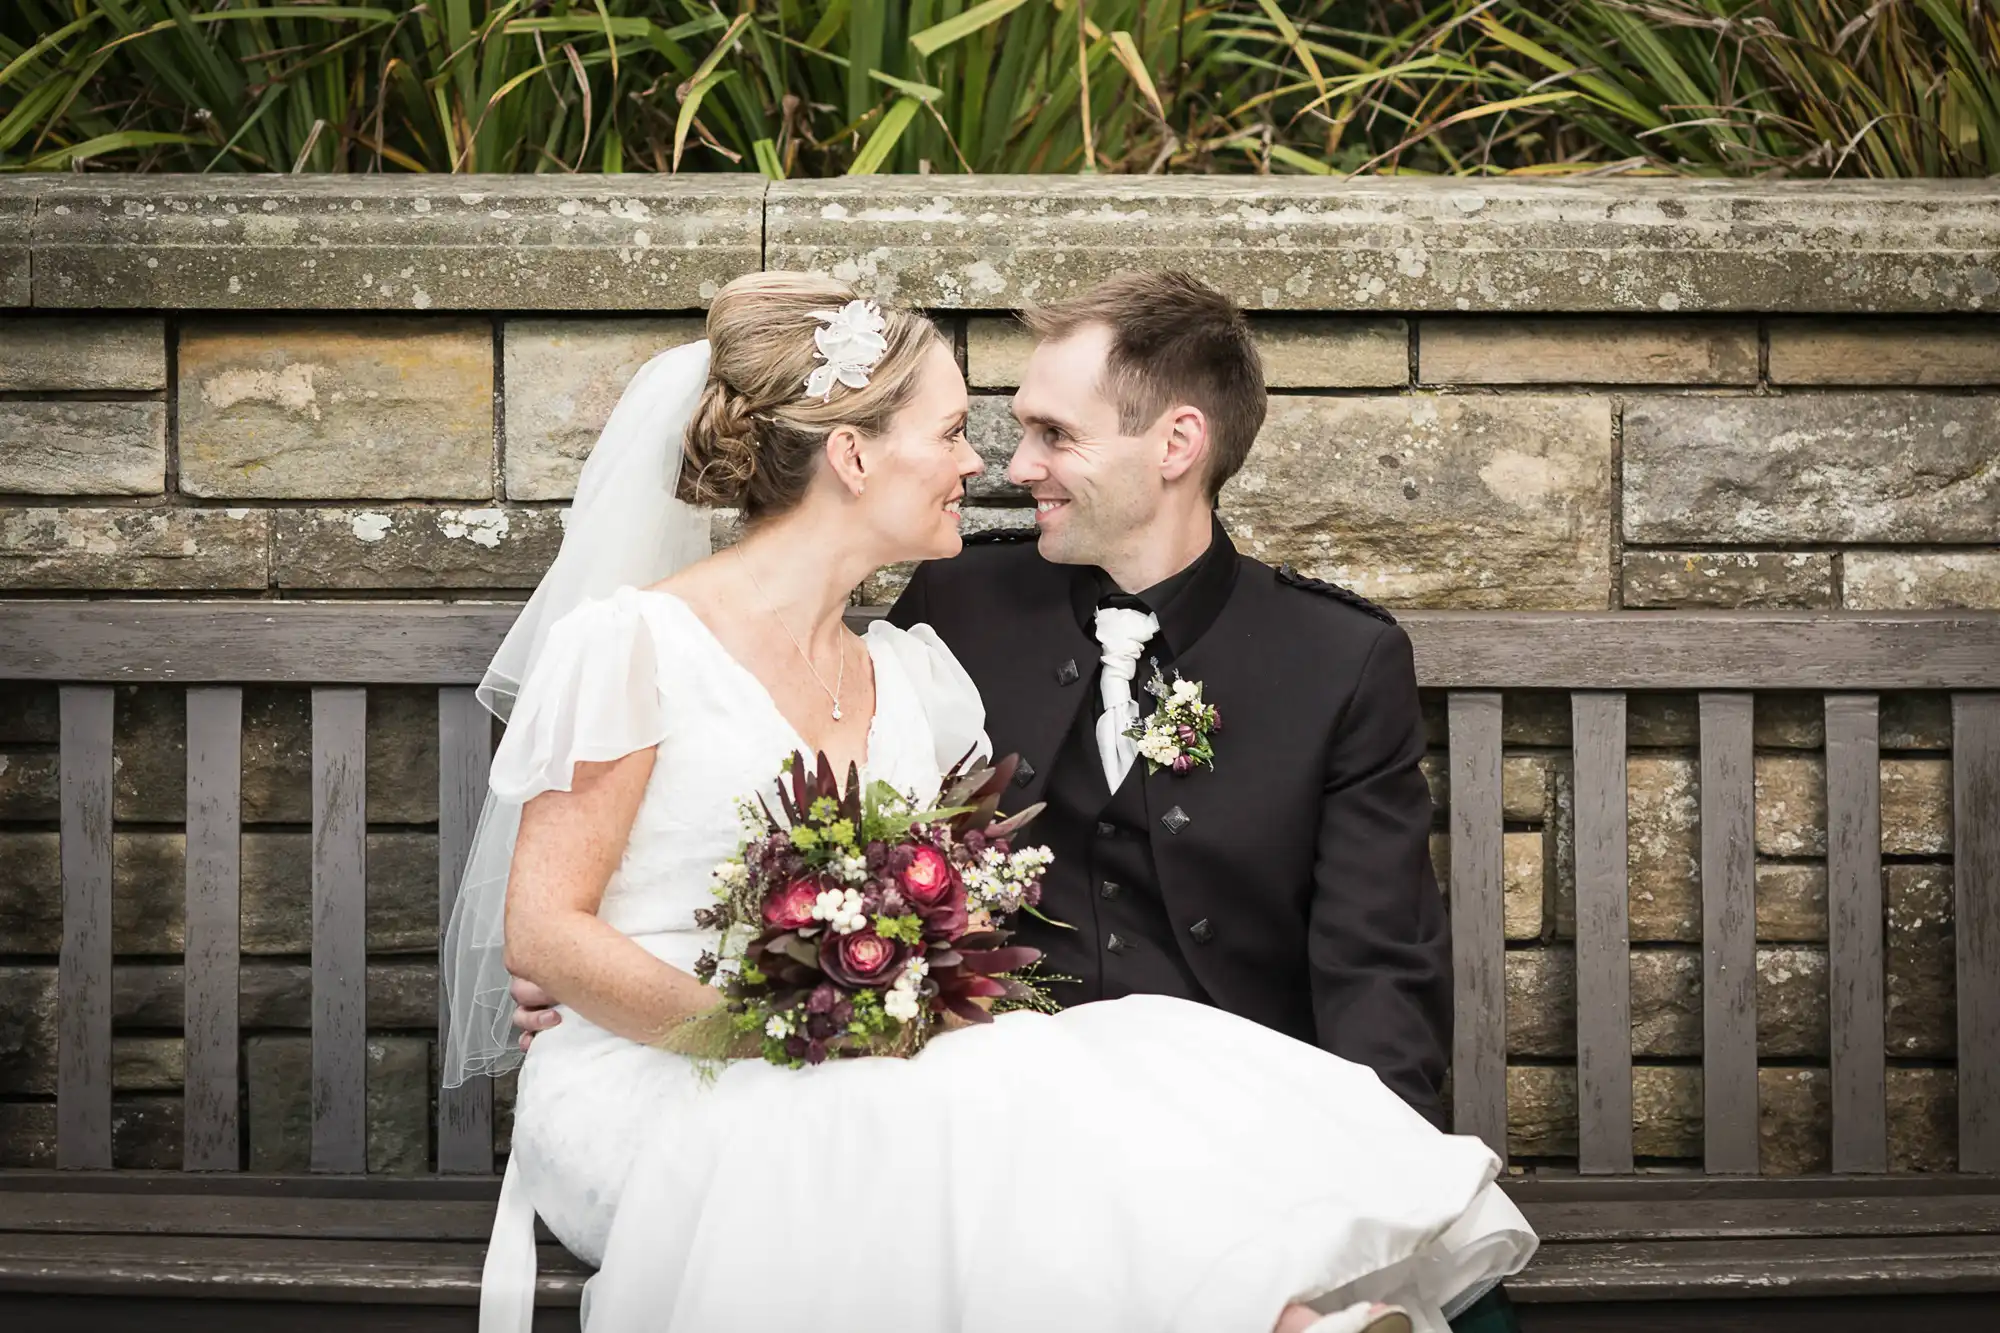 A bride and groom smiling at each other while sitting on a bench, the bride holding a bouquet of flowers.